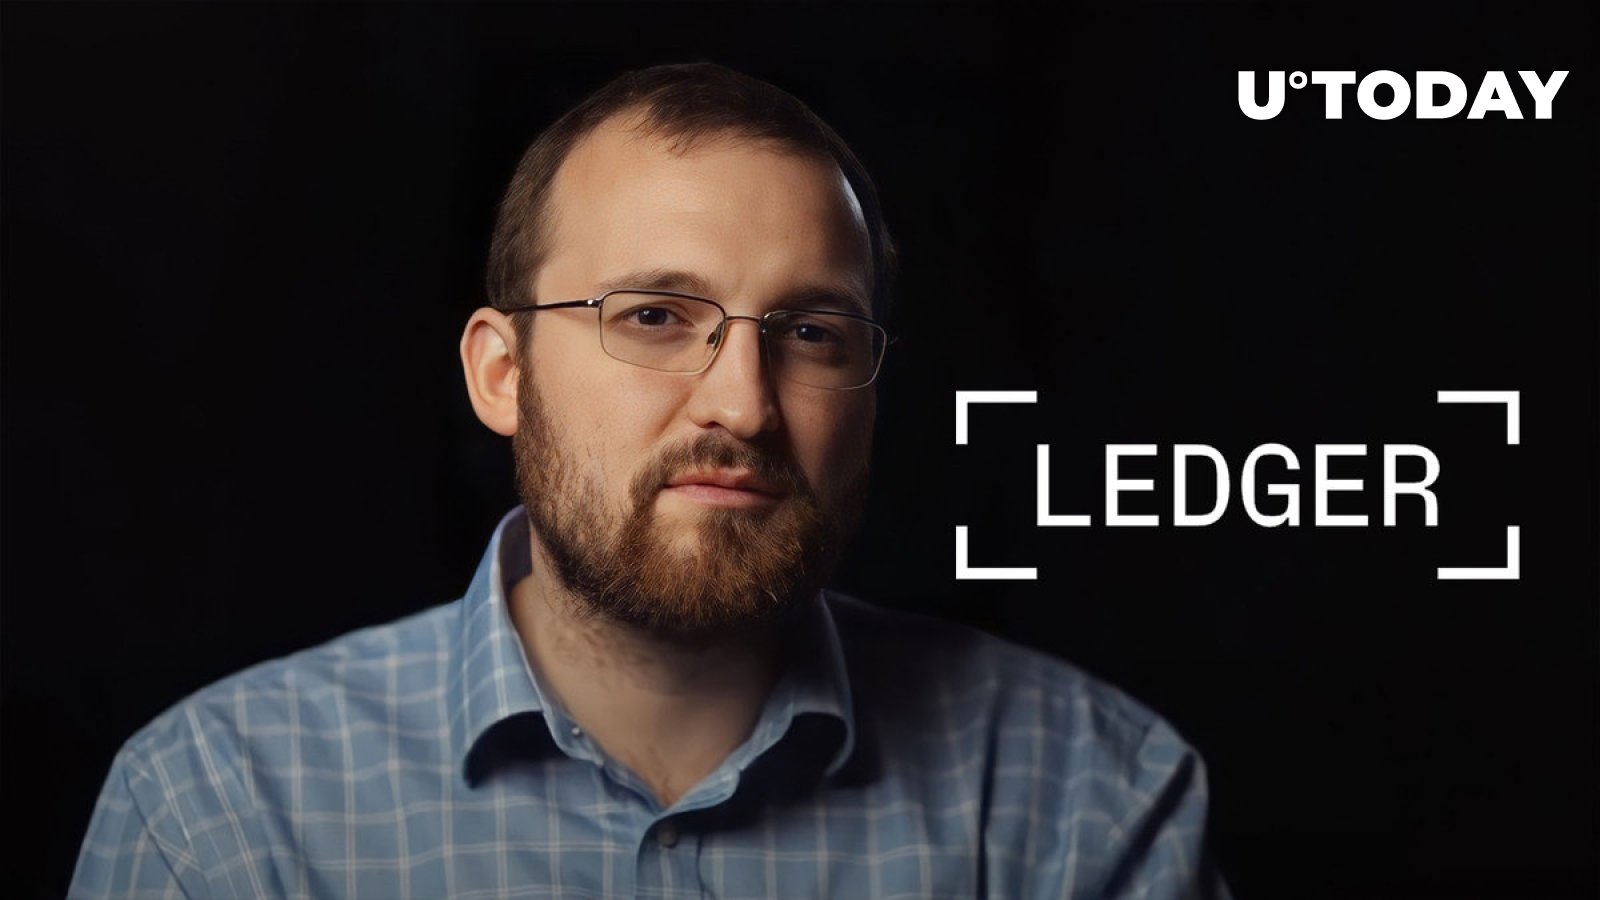 cardano-founder-explains-his-position-on-ledger-s-controversial-upgrade